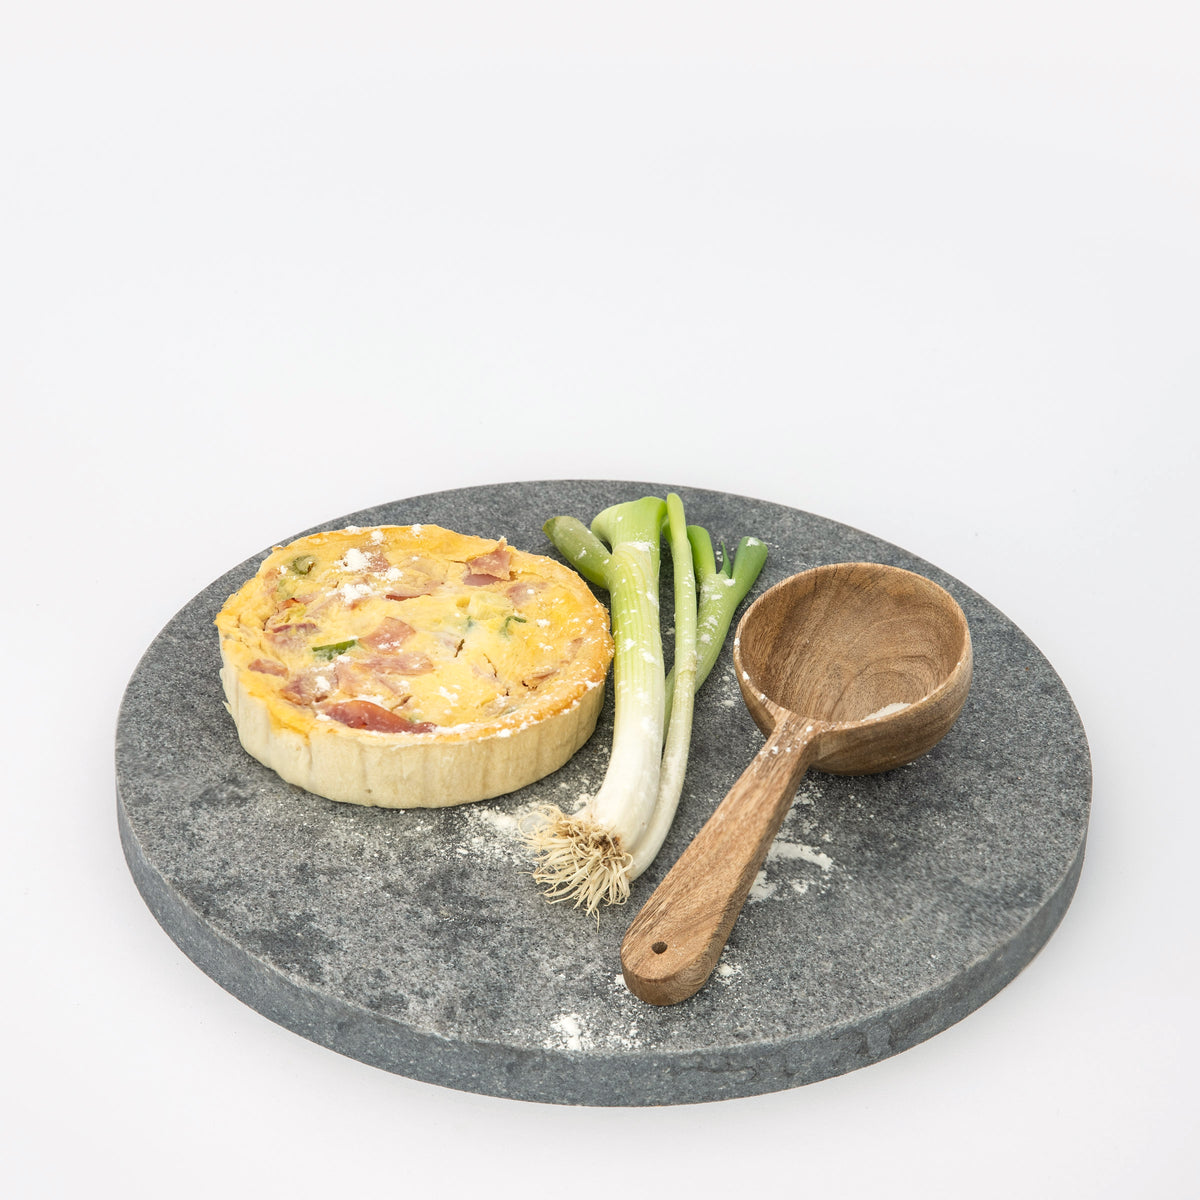 Large Quartz Round Serving Platter in Caeserstone Rugged Concrete by Aureliia Collection. This serving platter is styled with timber soup spoon, fresh green onions and quiche. An excellent home decor addition for the avid entertainer.